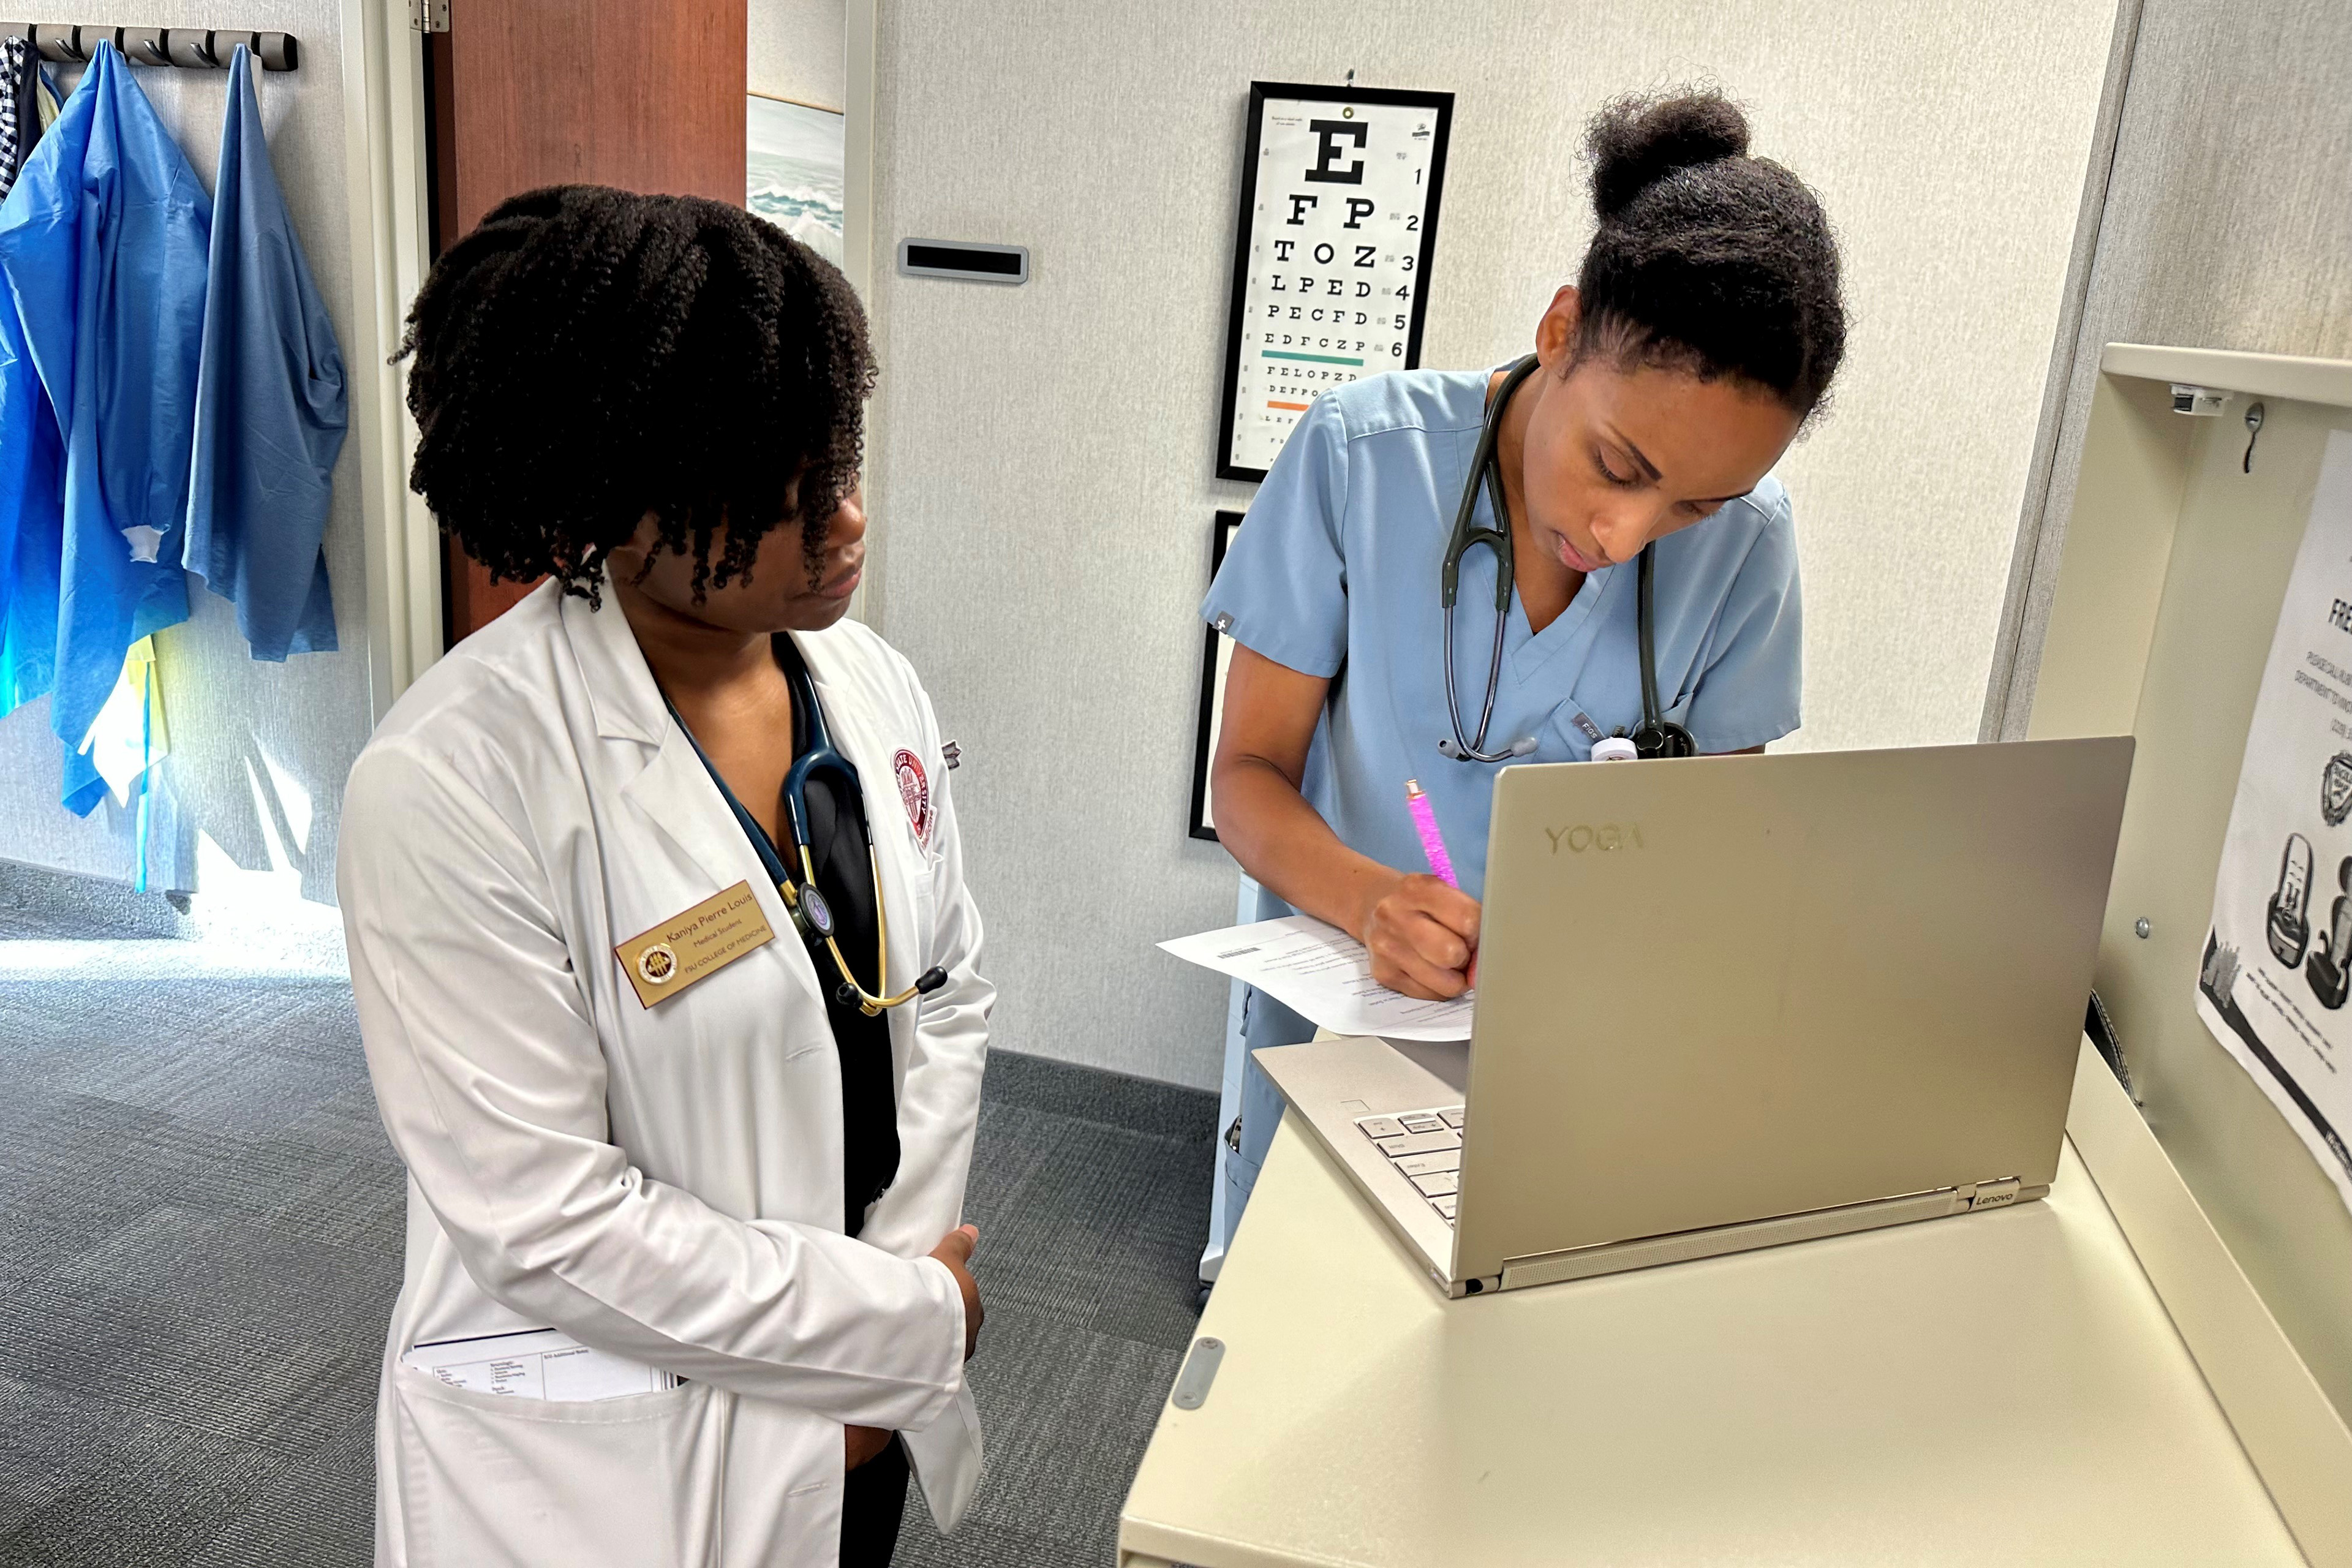 Kaniya Pierre Louis (left) stands beside Zita Magloire (right) as she works at a computer. Both are in a hospital setting and wearing scrubs. Kaniya Pierre Louis wears a white doctor's jacket.